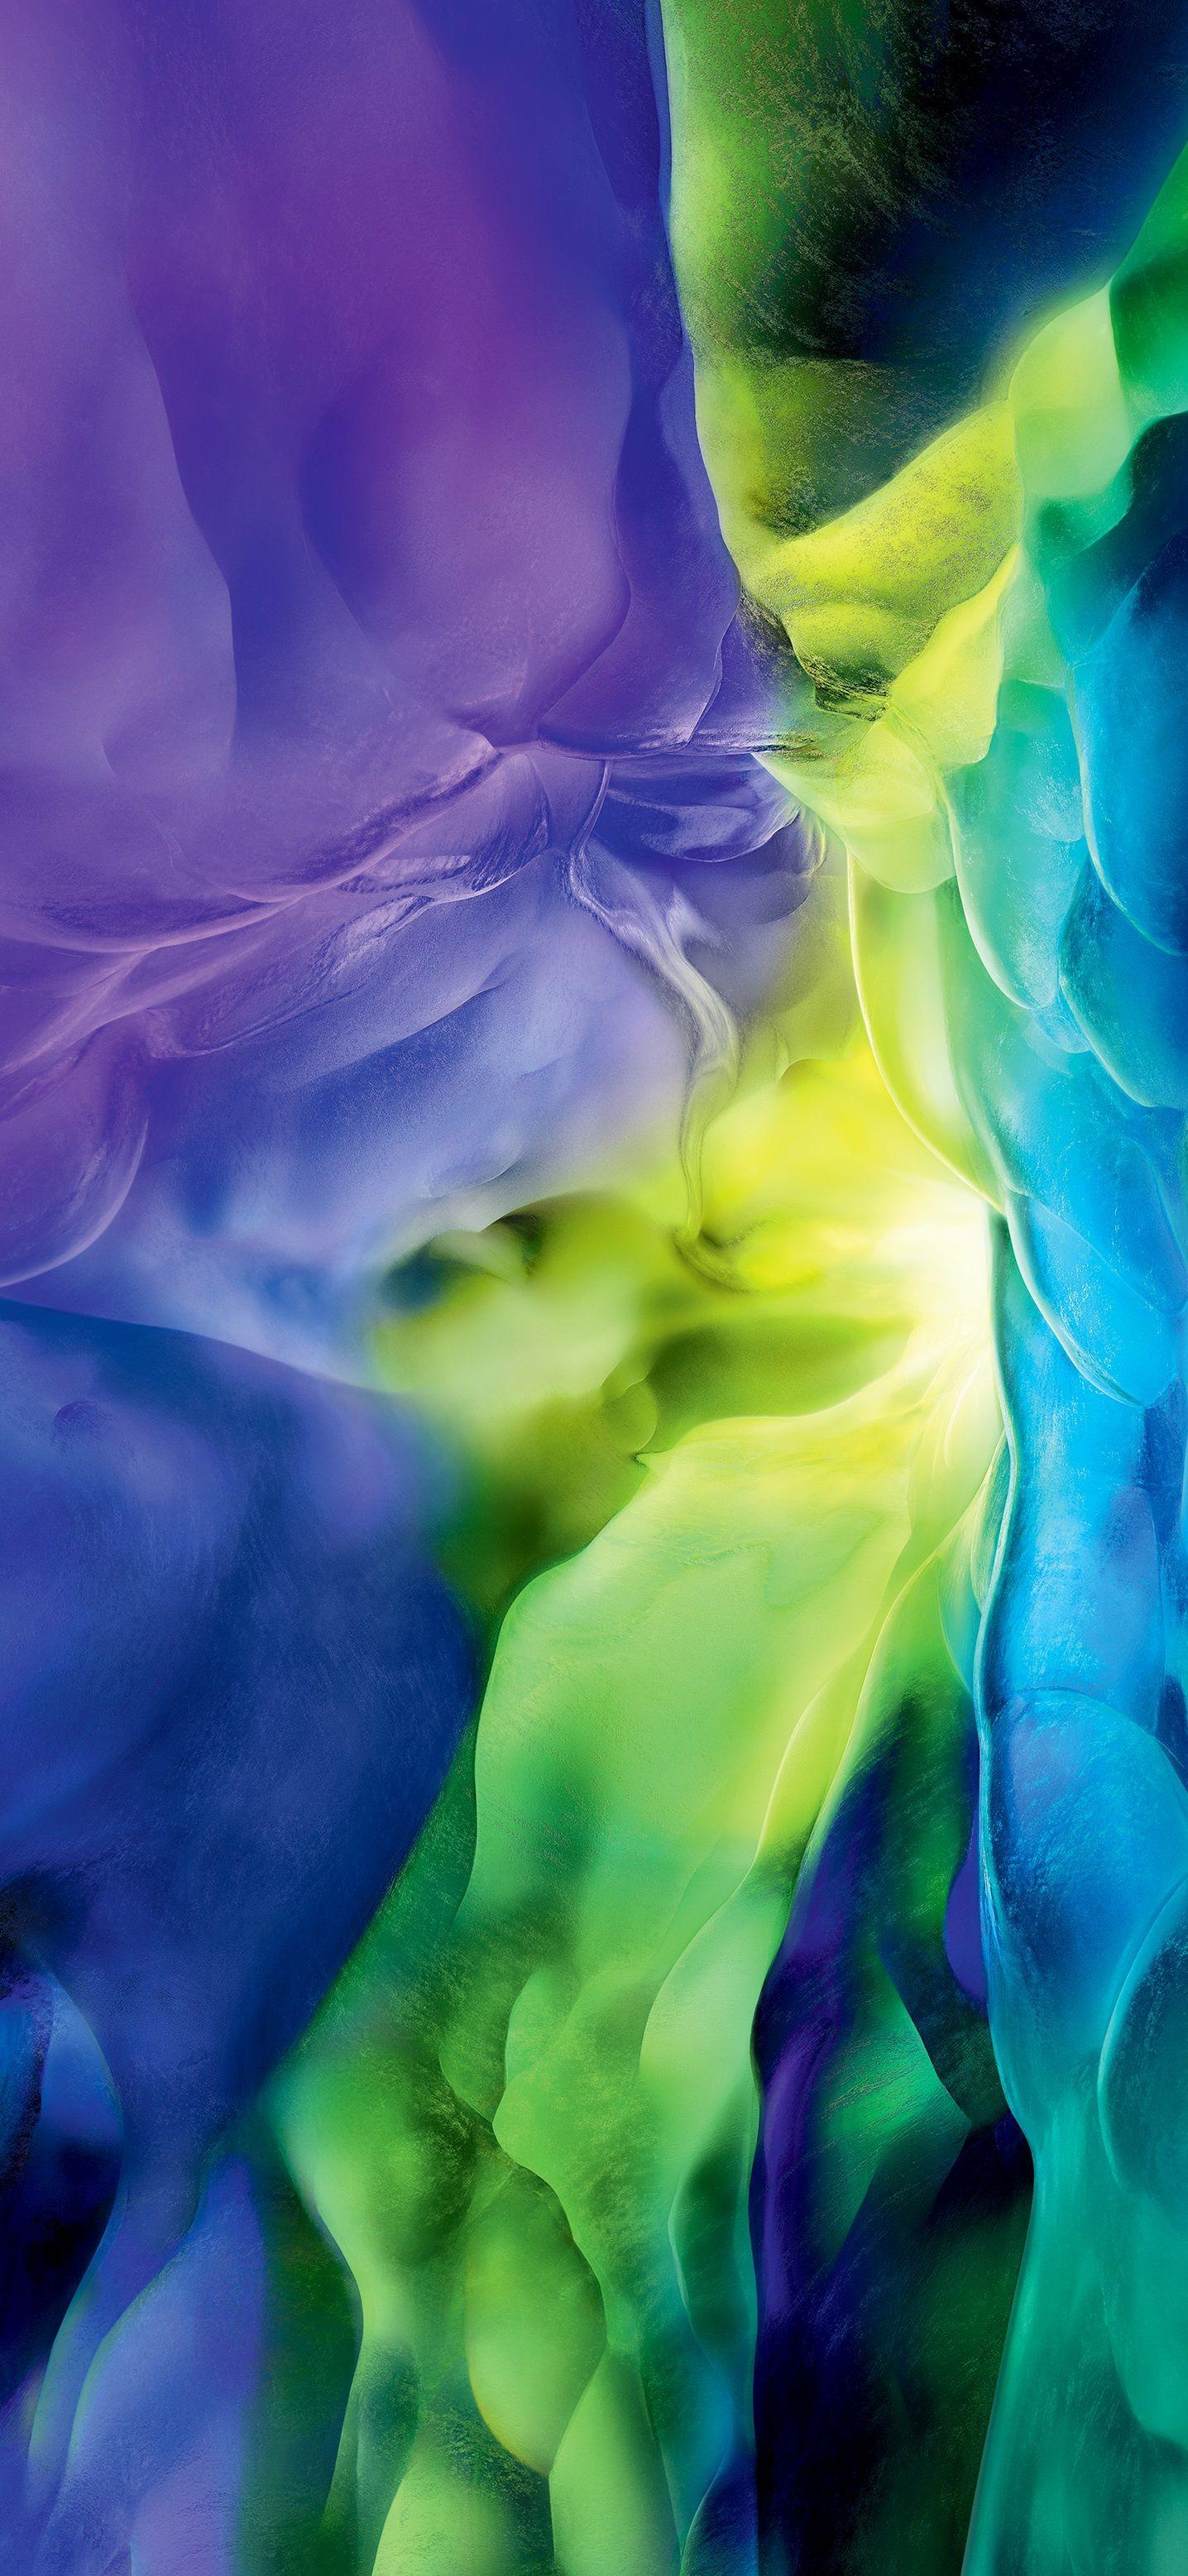 Galaxy Note 20 Ultra Wallpapers - Top Free Galaxy Note 20 Ultra ...